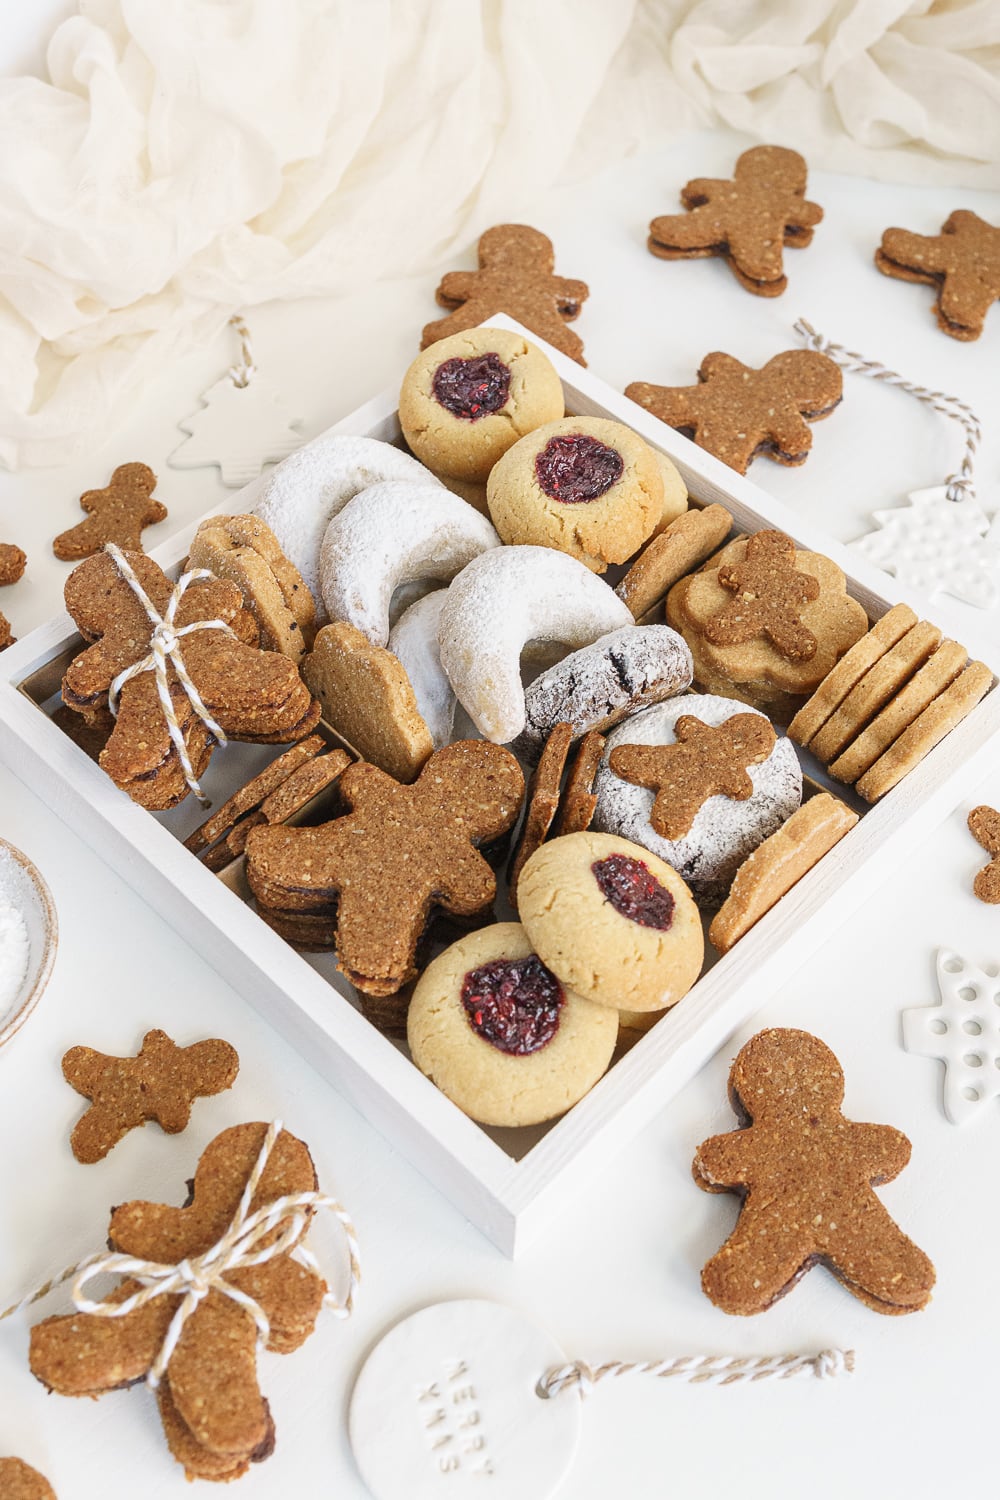 21 Healthy Christmas Cookies That Are Insanely Good!